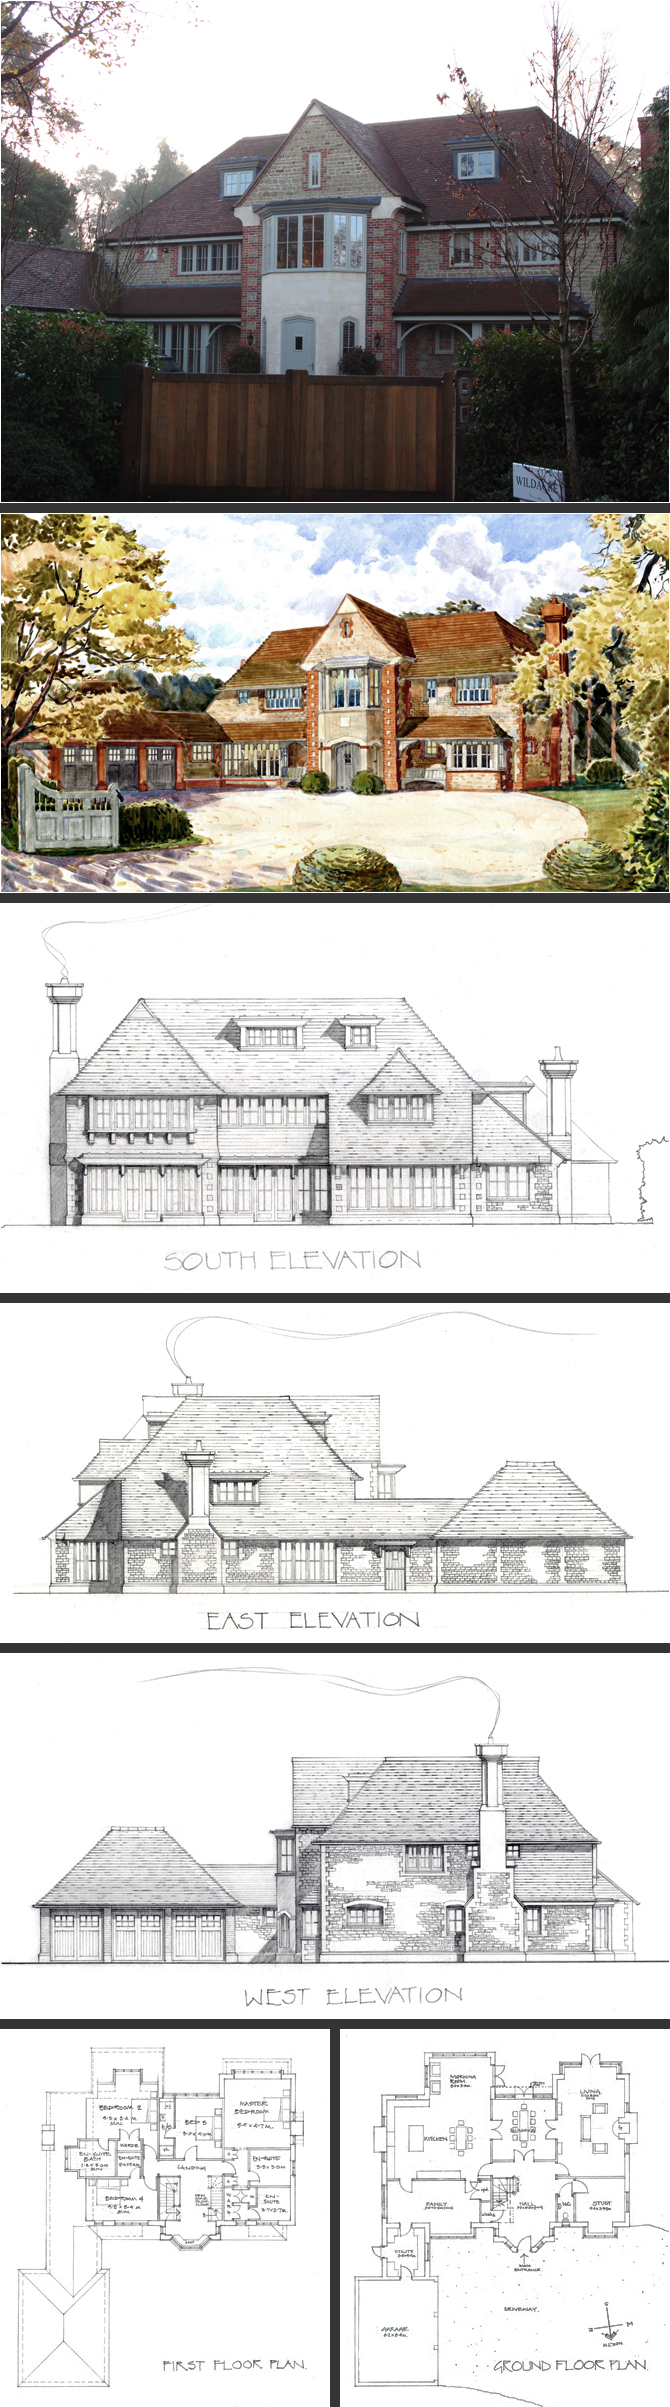 Original watercolour and plans of proposed house